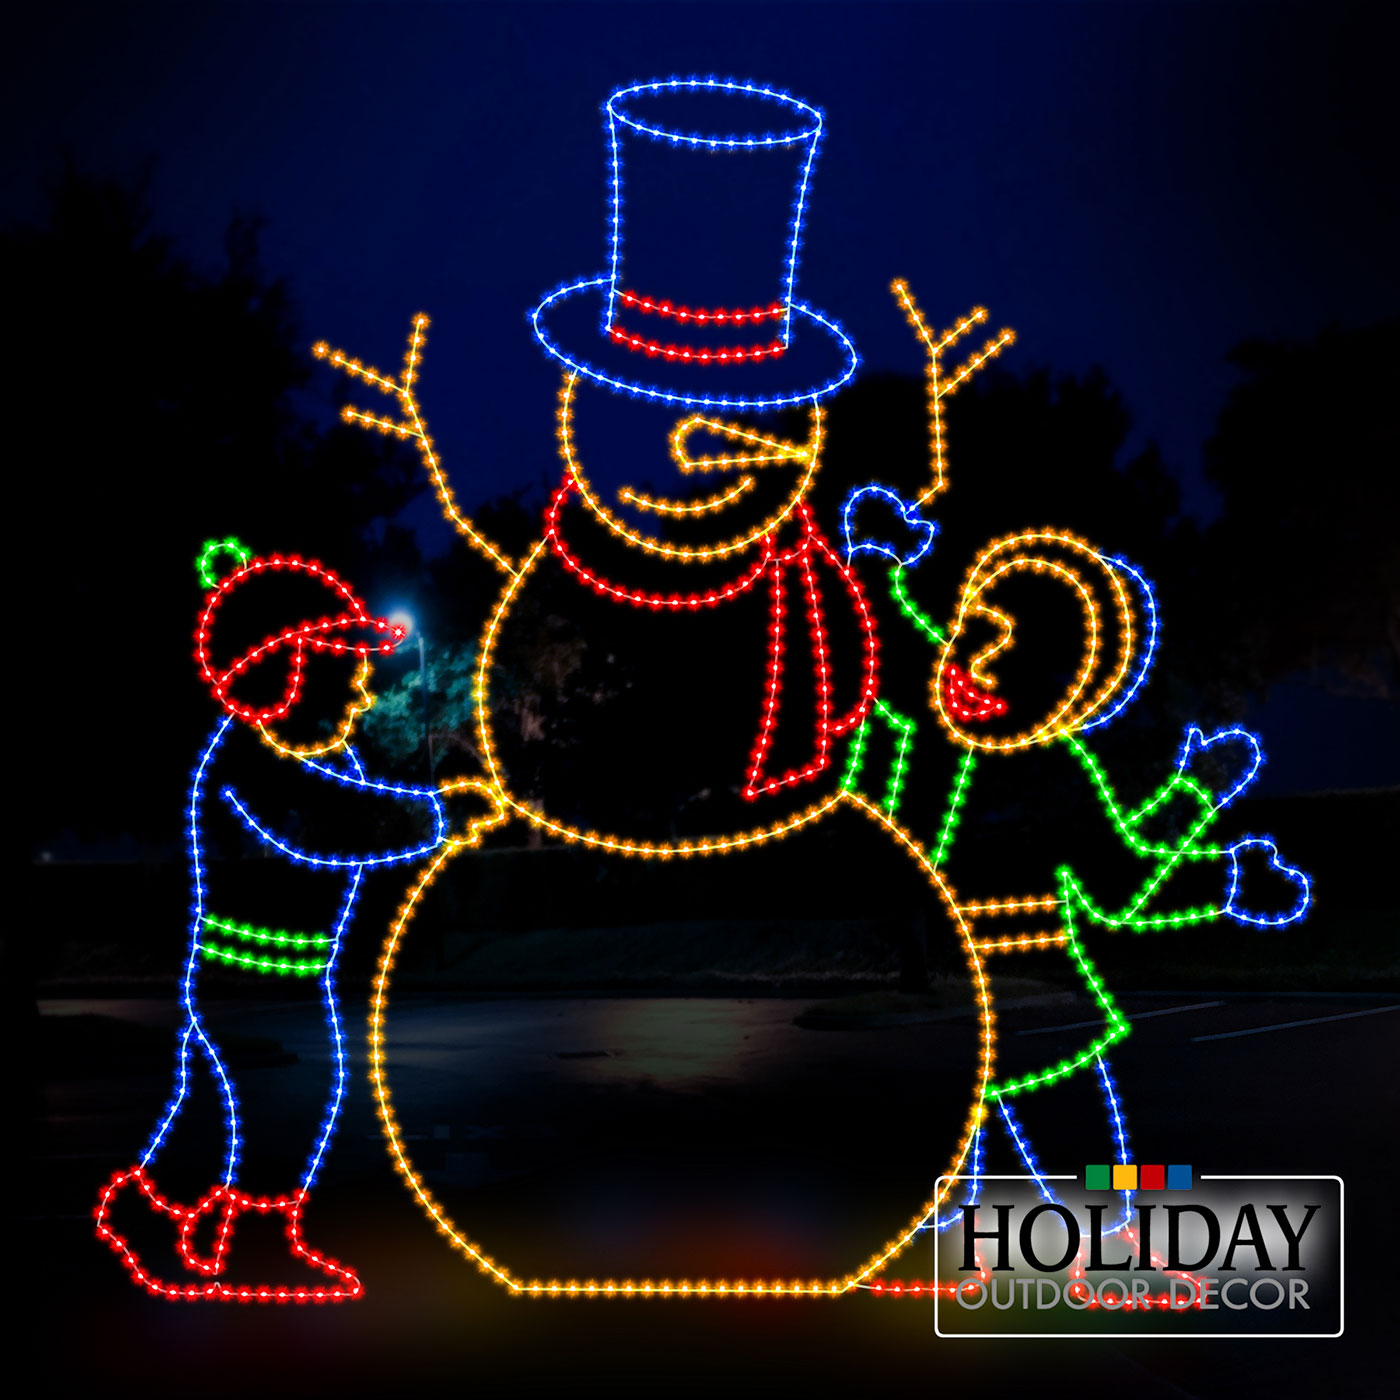 Children Building Snowman (Animated) - Holiday Outdoor Decor